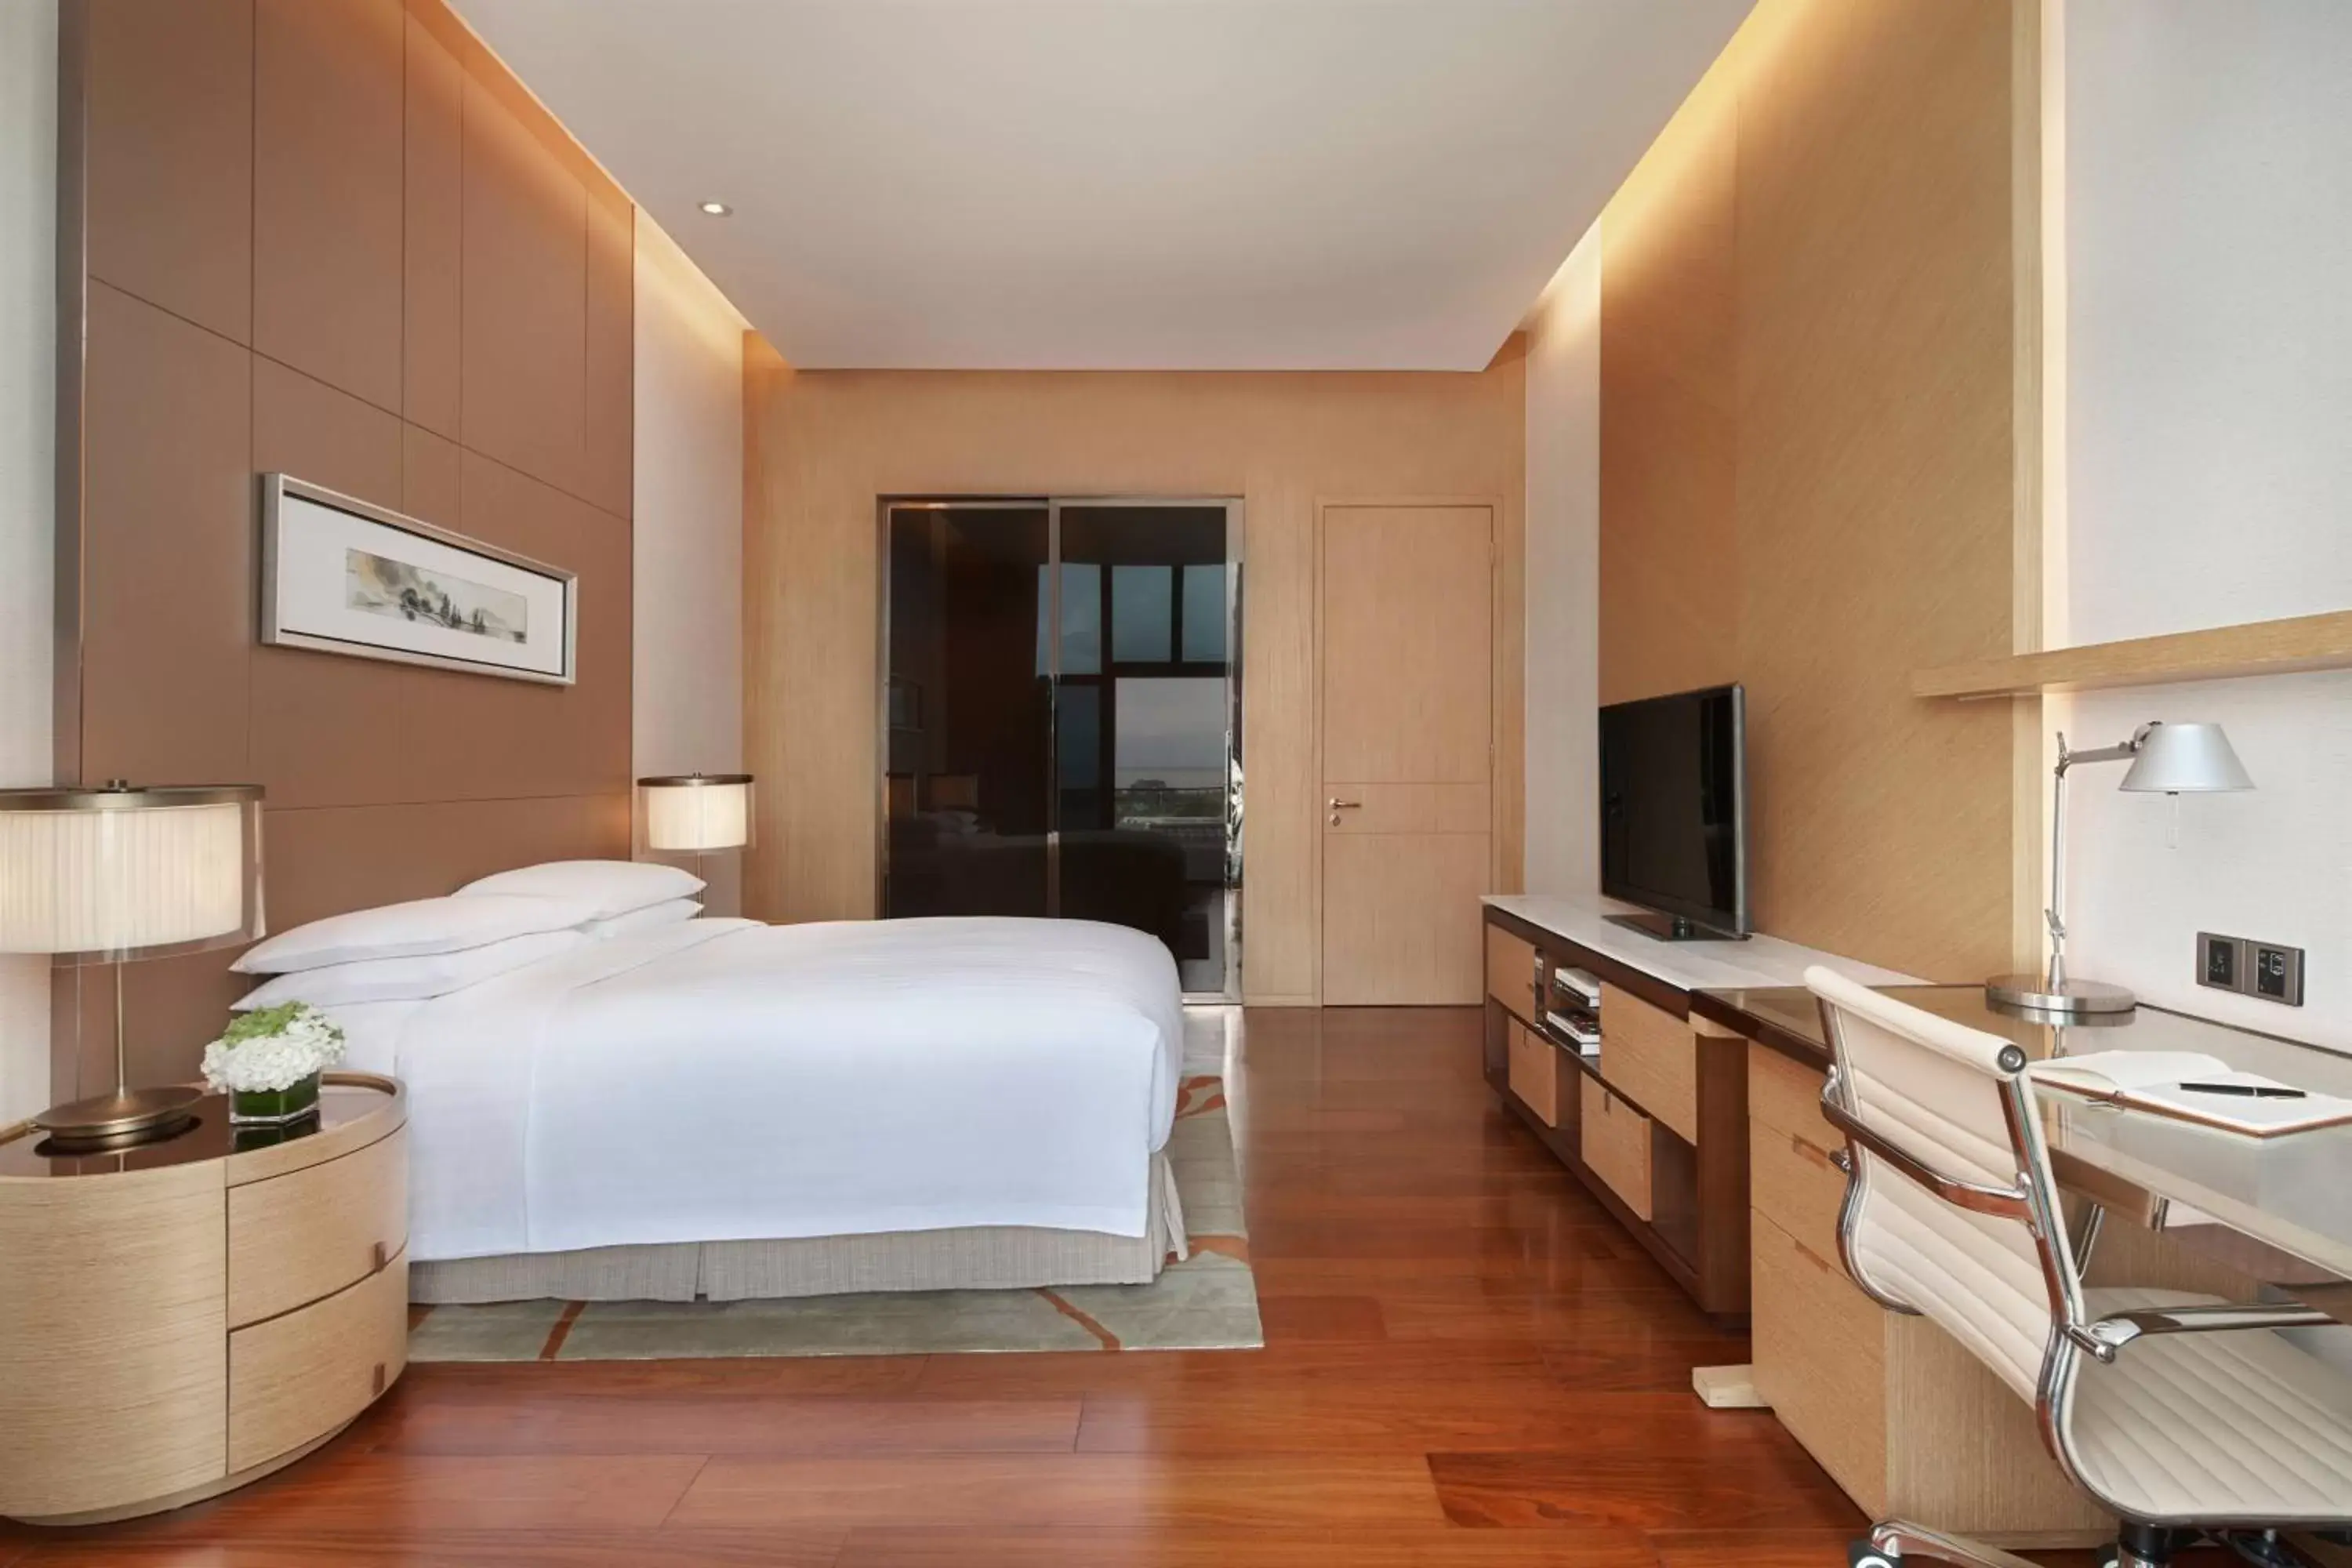 Bedroom in The OCT Harbour, Shenzhen - Marriott Executive Apartments